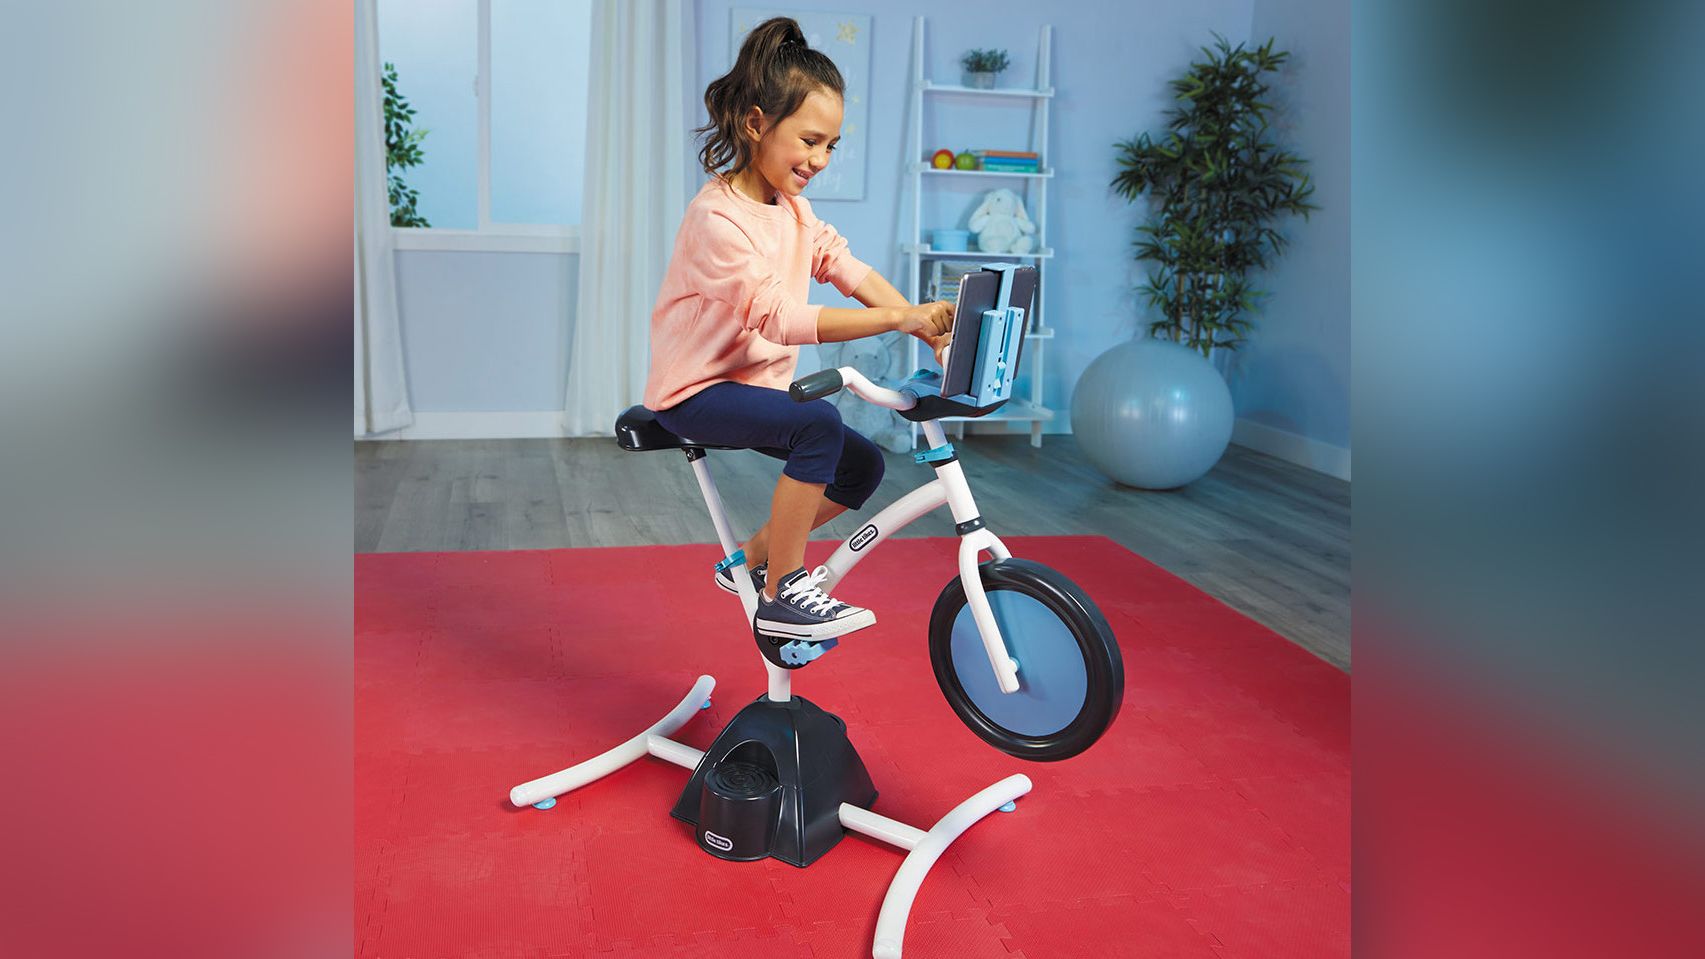 Little Tikes Cycle | vlr.eng.br